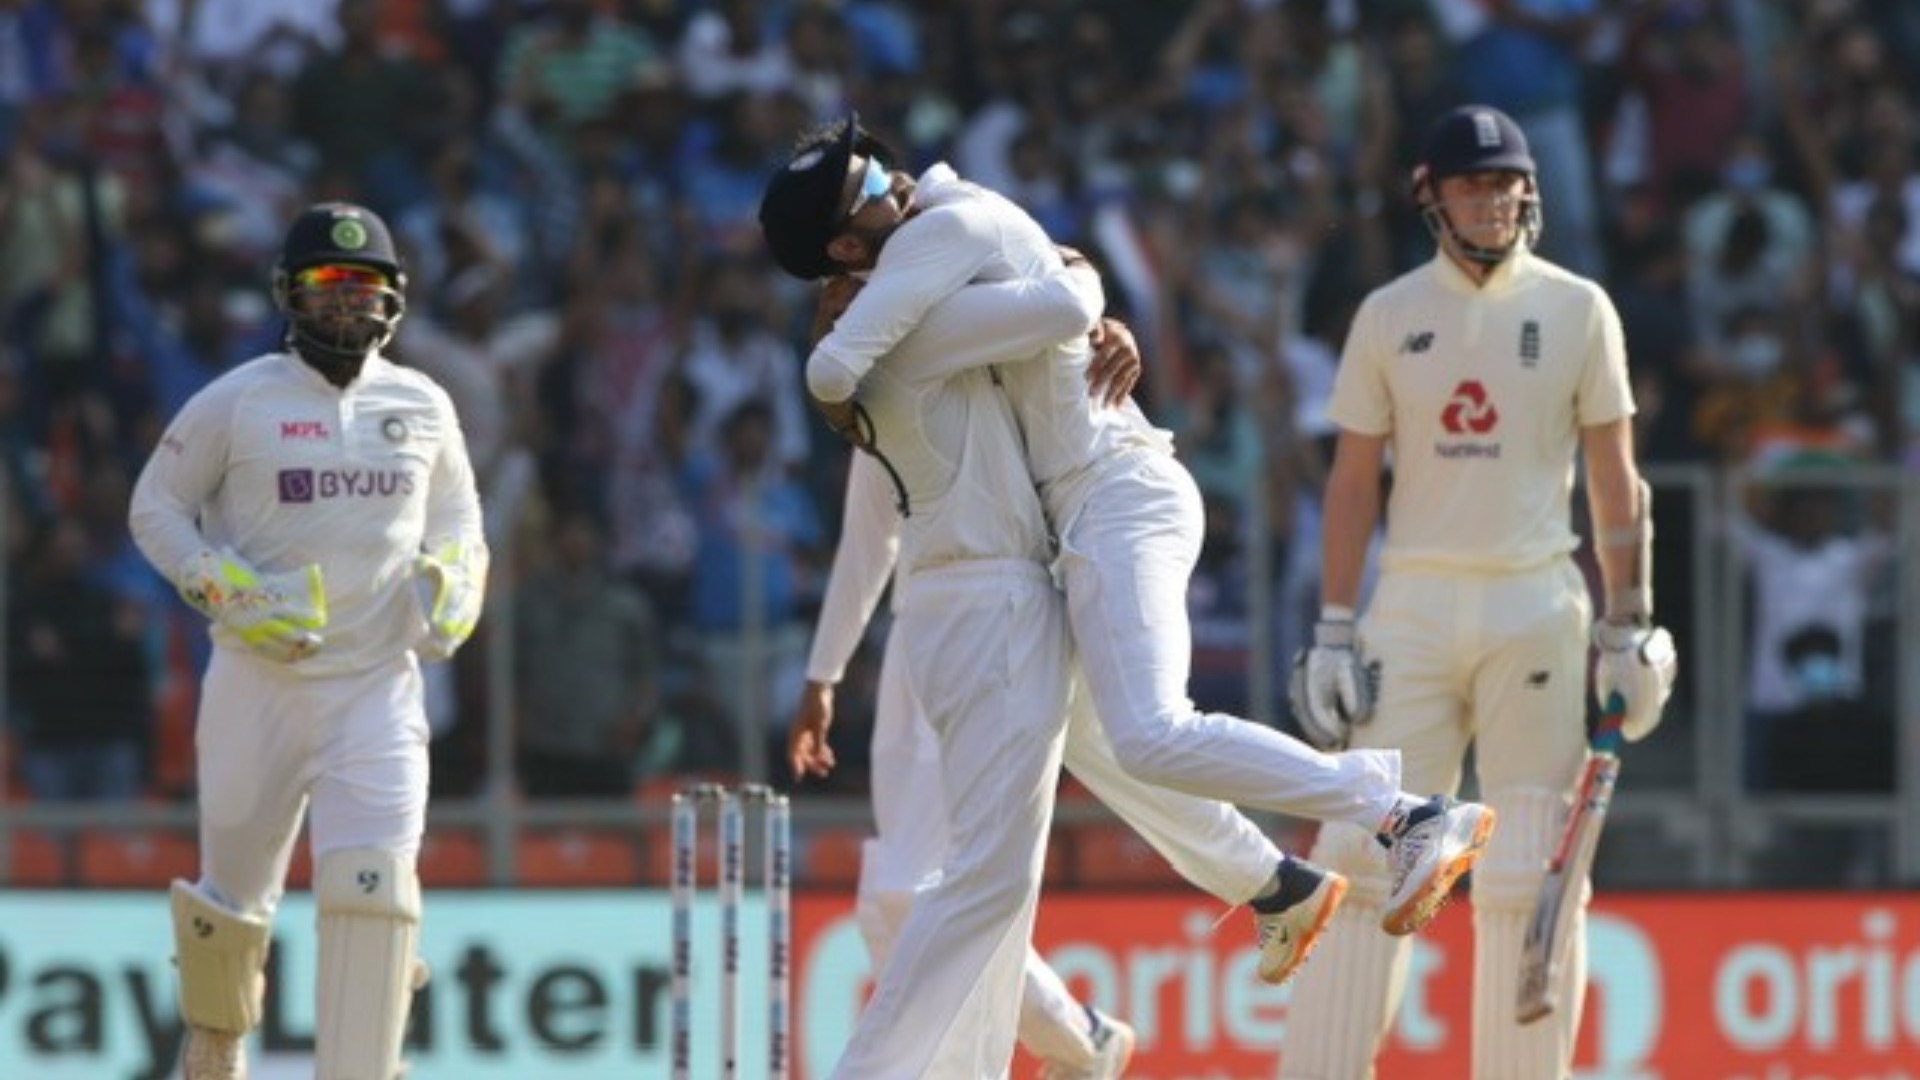 England lost eight wickets for 38 runs to be bowled out cheaply in the third Test as India's spinners starred once again.